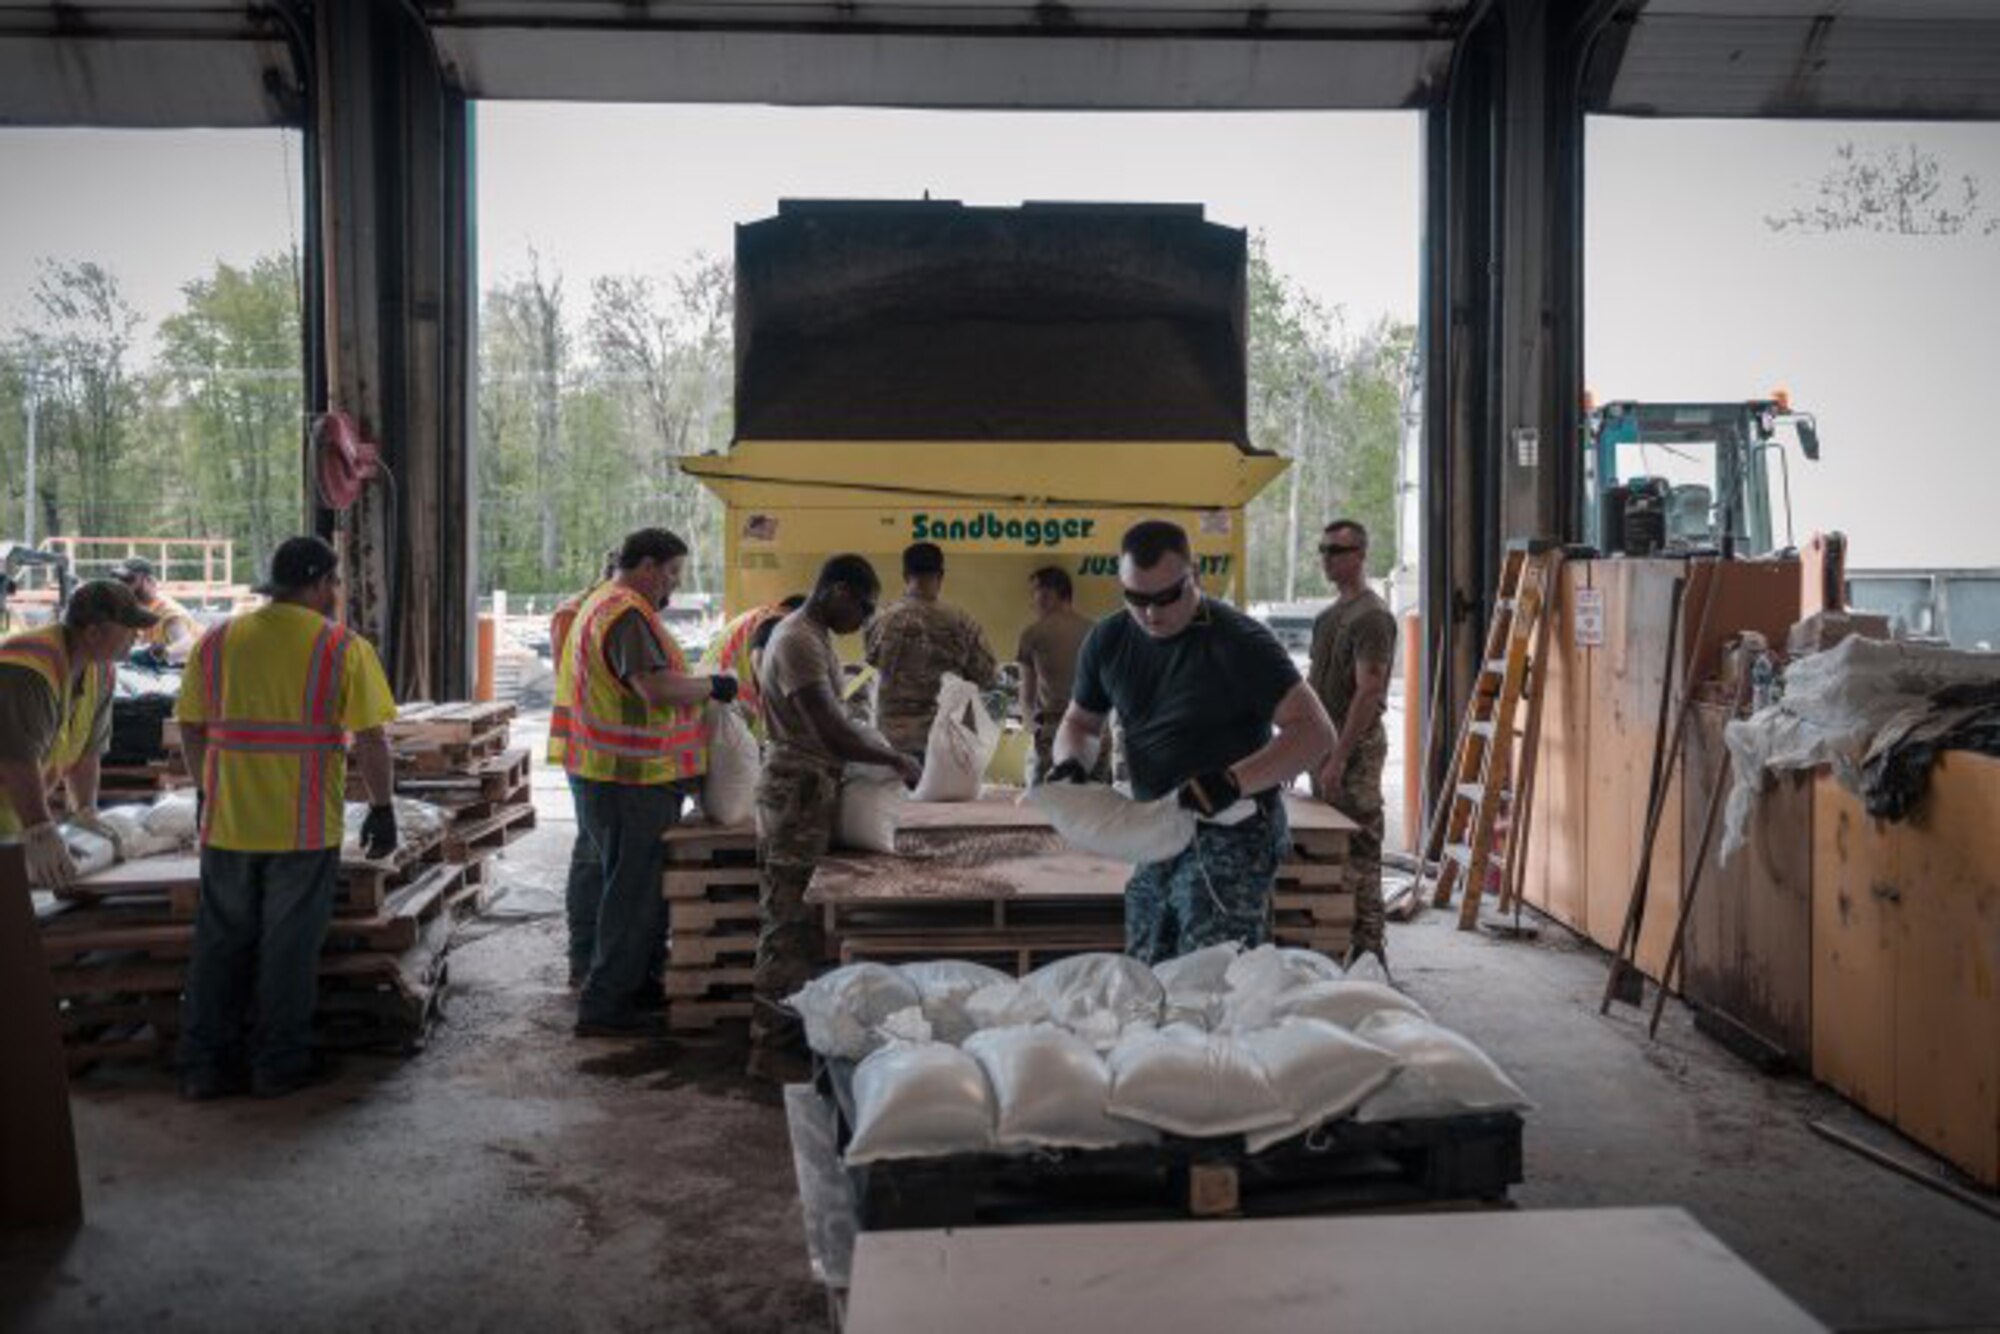 Service members assigned to the New York Army National Guard and New York Naval Militia, along with employees from the Department of Transportation, fill sandbags at Sodus Point, N.Y., May 20, 2019. The sandbags are being used to mitigate the effects of flooding along Lake Ontario as a result of rising water levels, that followed up with the activation of the troops by Gov. Andrew Cuomo.